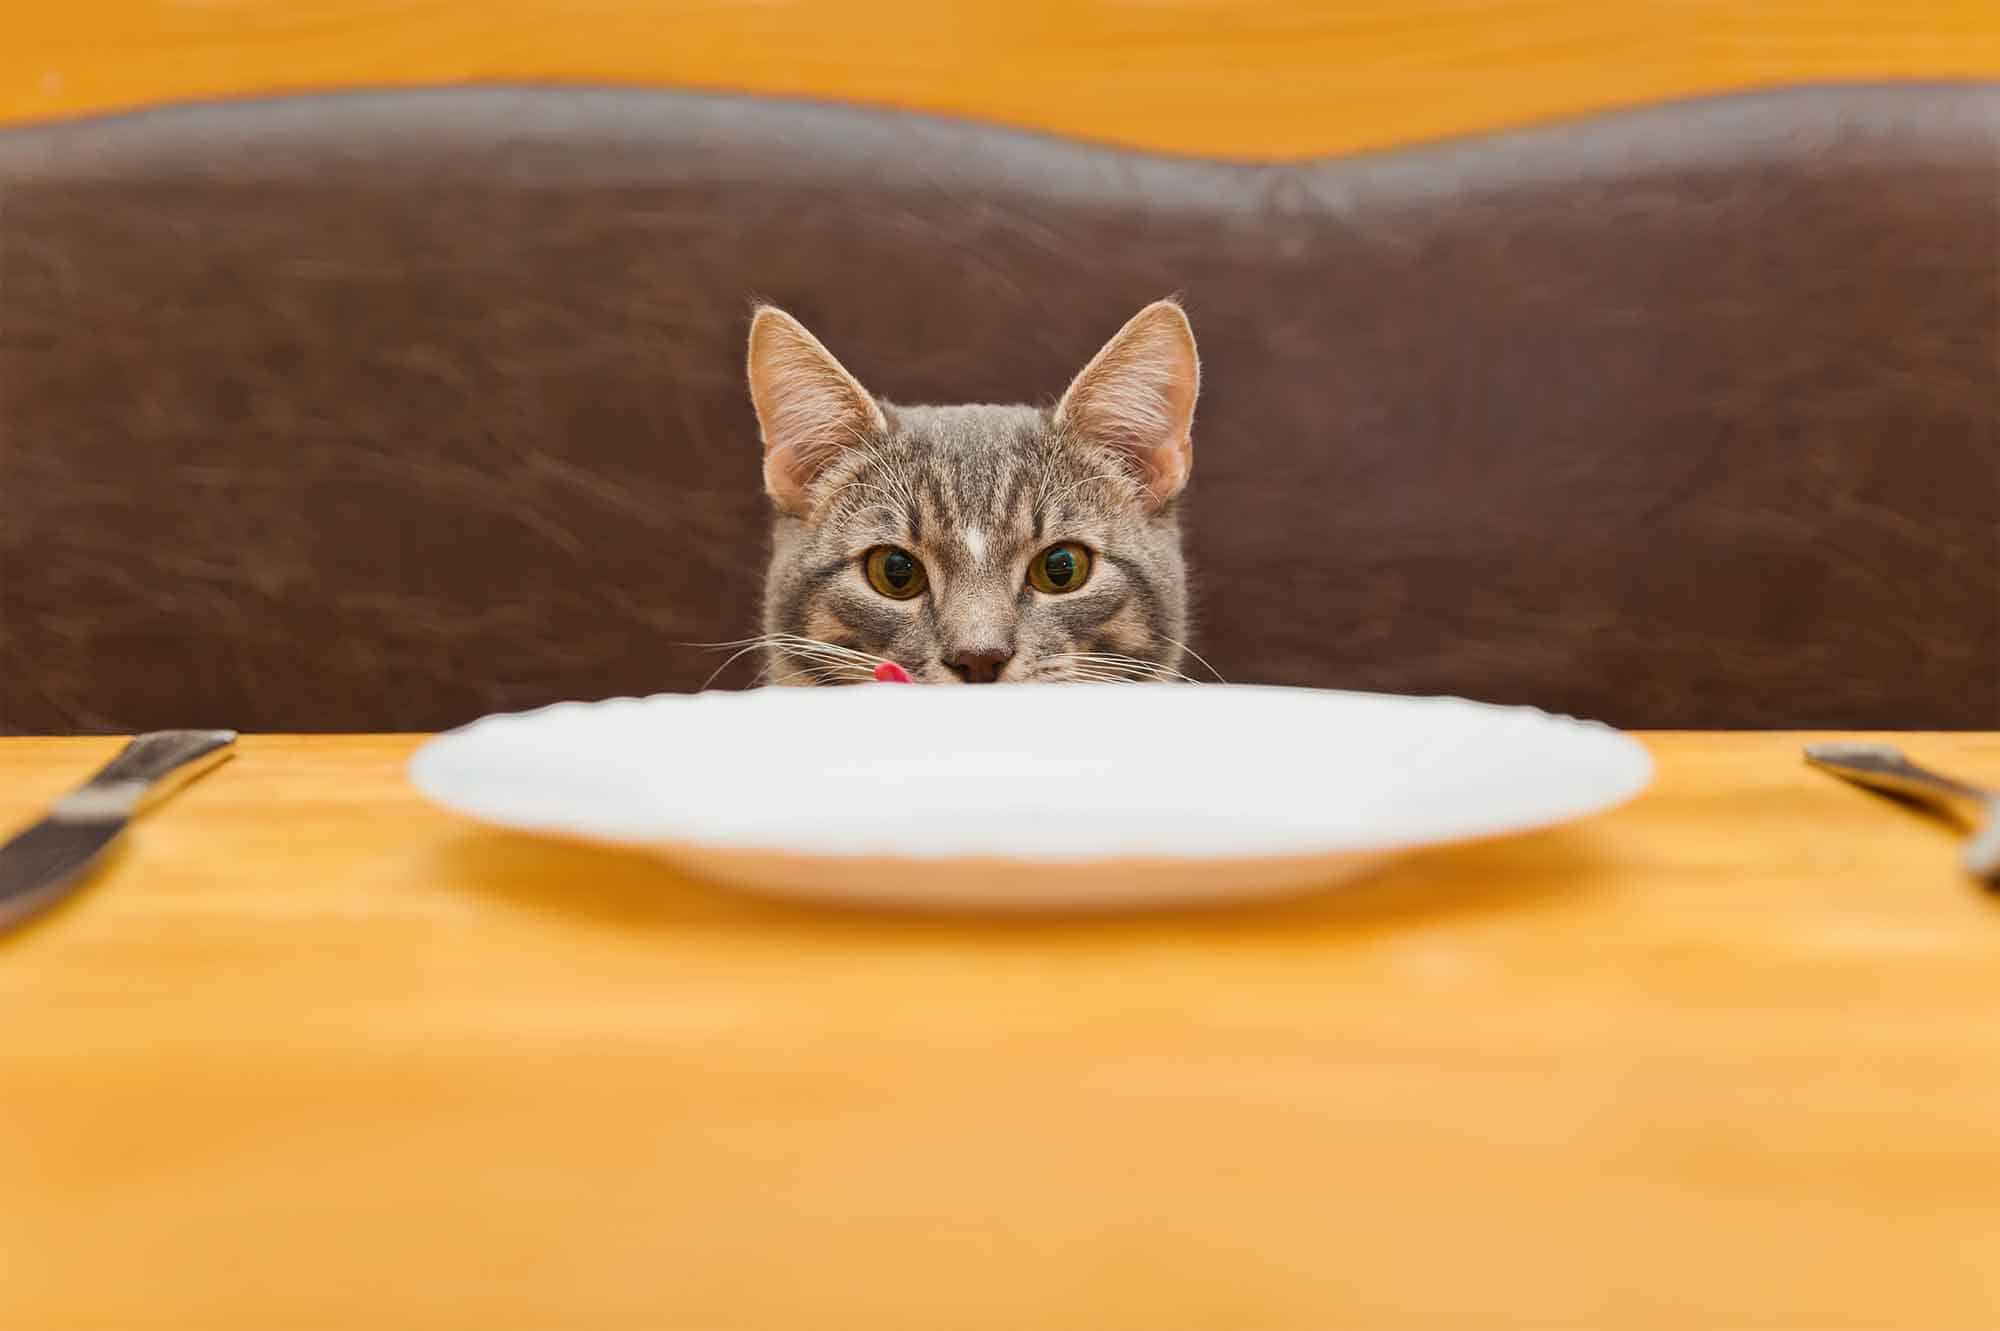 Kitty 911: What to Do when Your Cat Won’t Eat